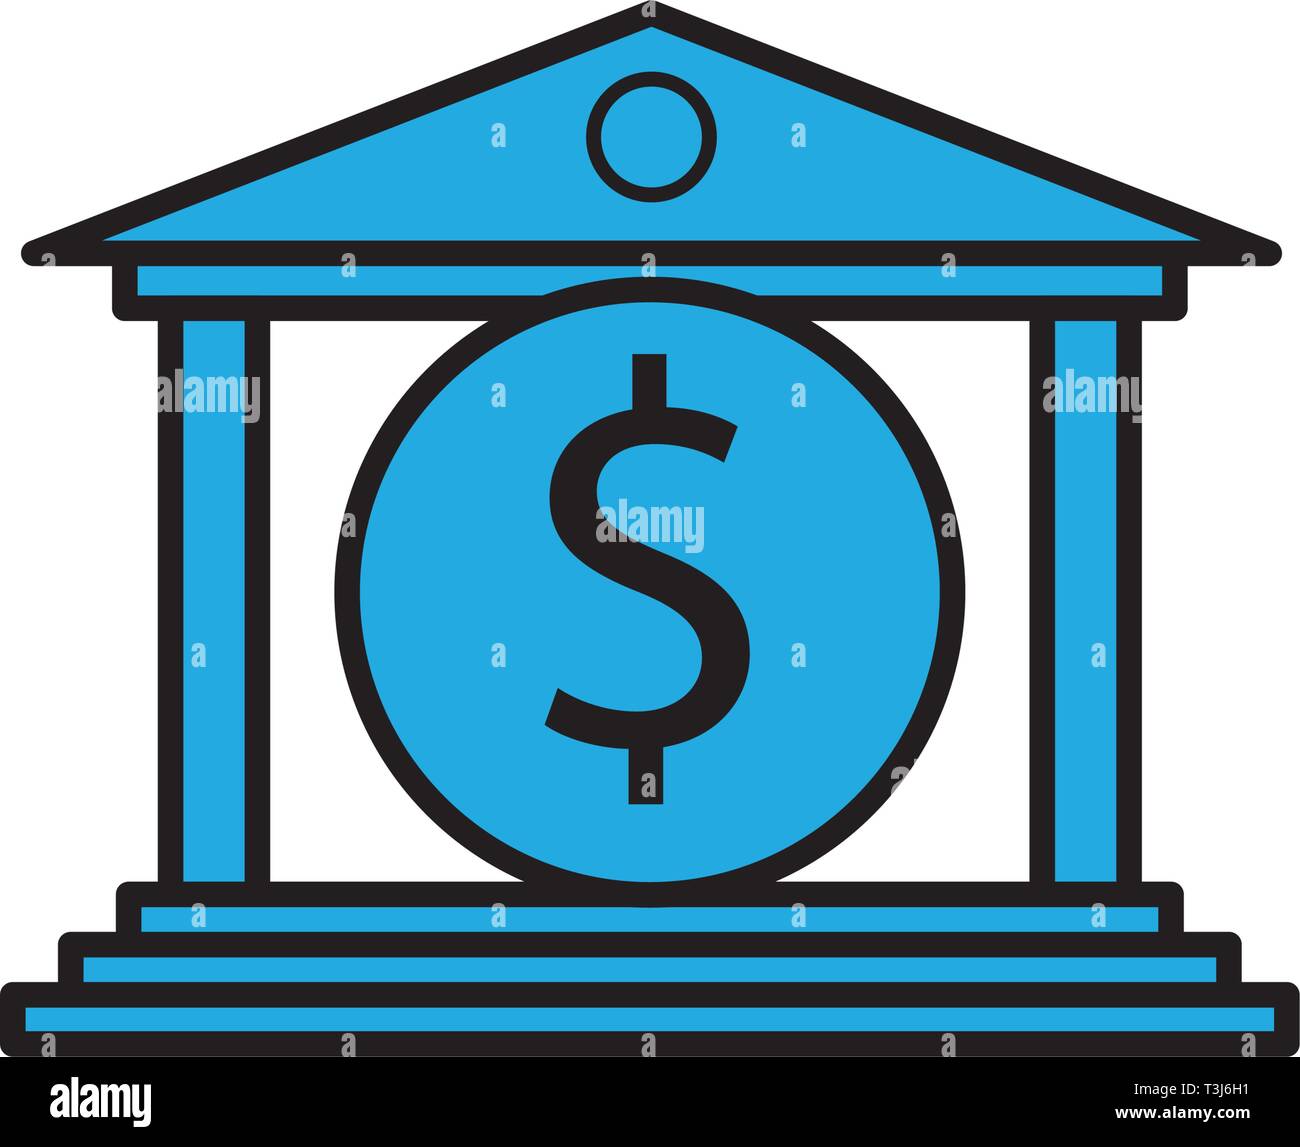 Bank exterior sign Stock Vector Images - Page 2 - Alamy